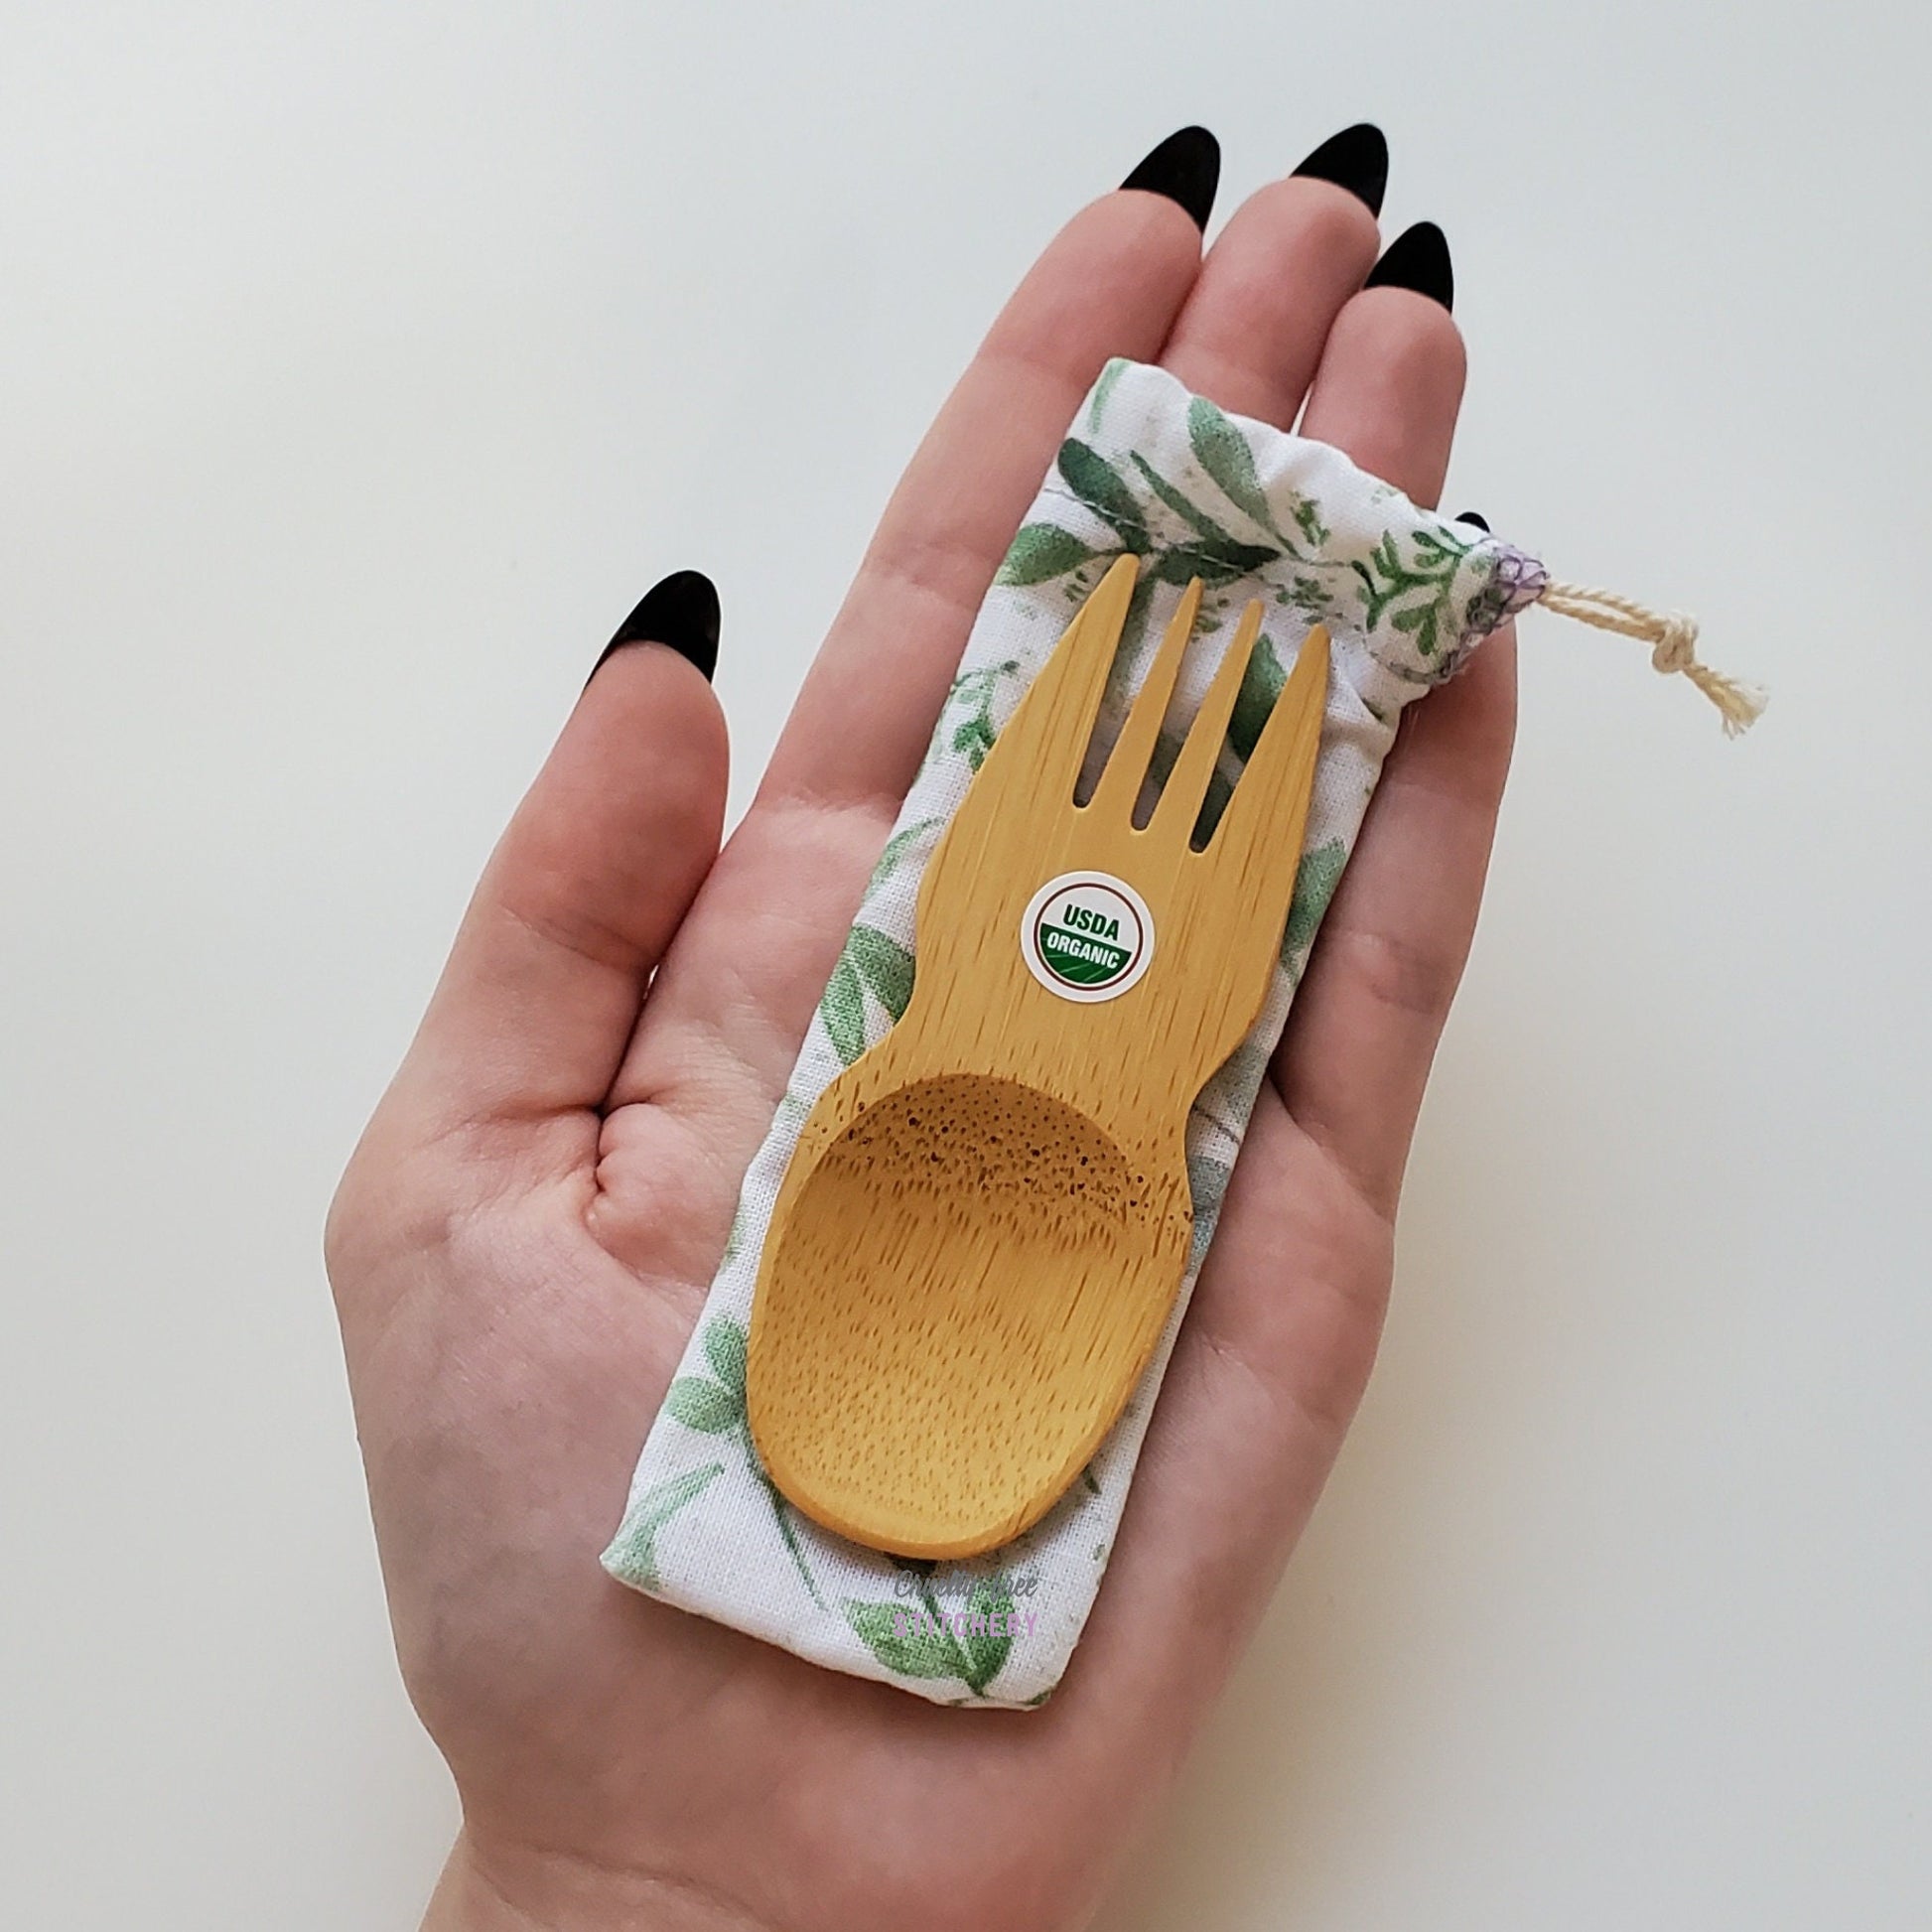 Reusable bamboo spork with pouch. Eucalyptus print fabric pouch with bamboo spork on top, laid on a hand for size reference. The spork is slightly longer than the fingers.